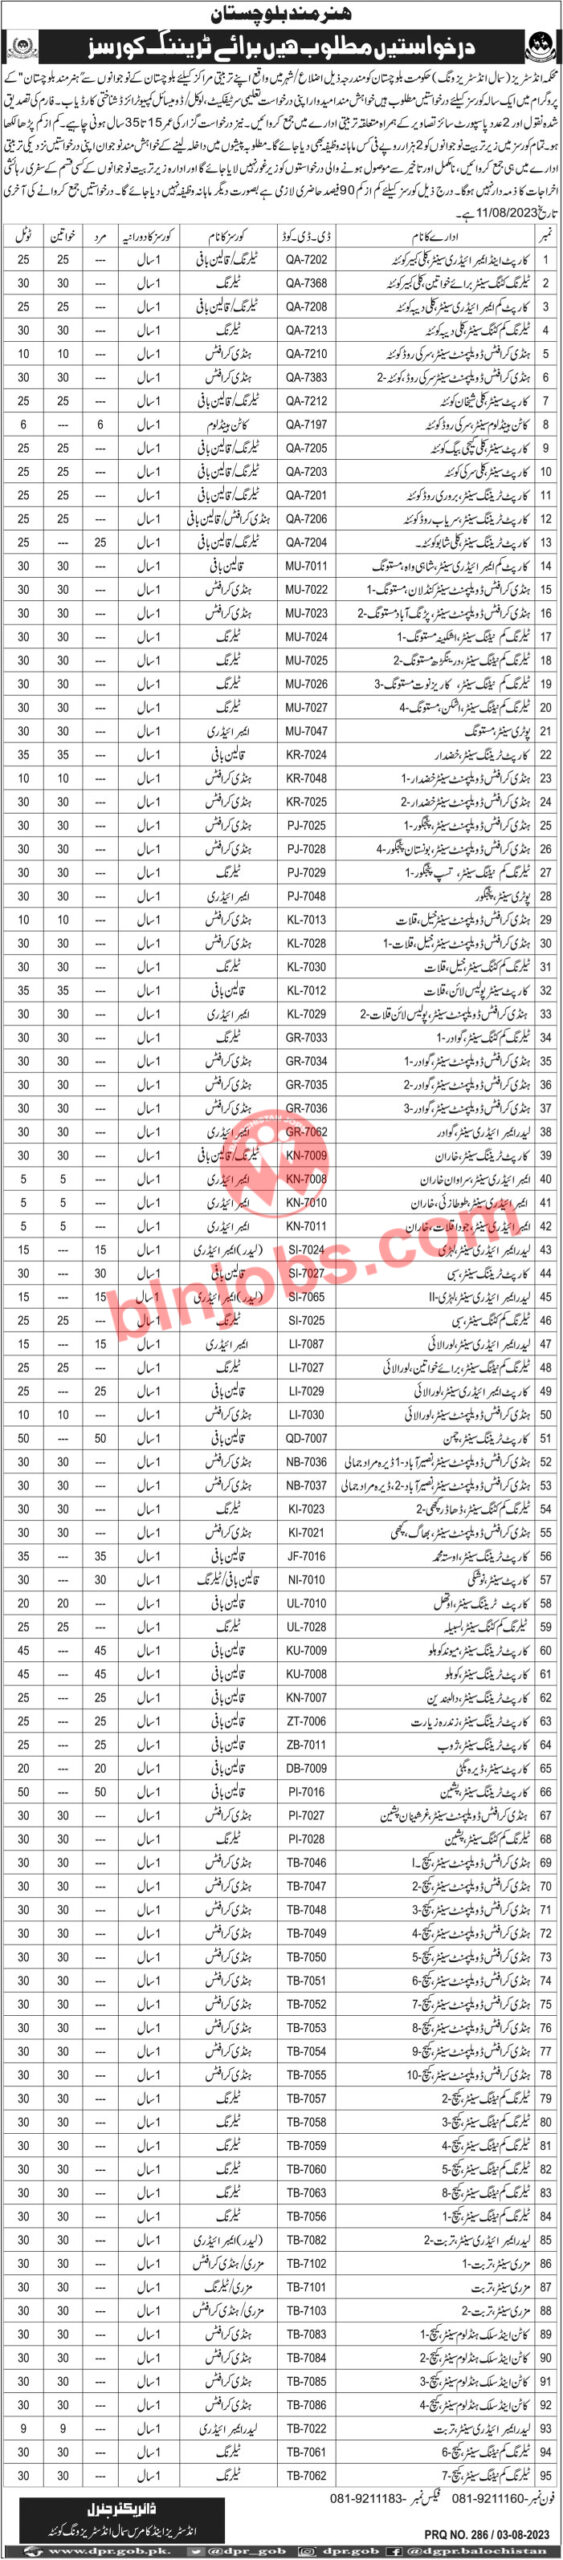 Small Industries Wing Hunar Mang Balochistan Training Course Admissions